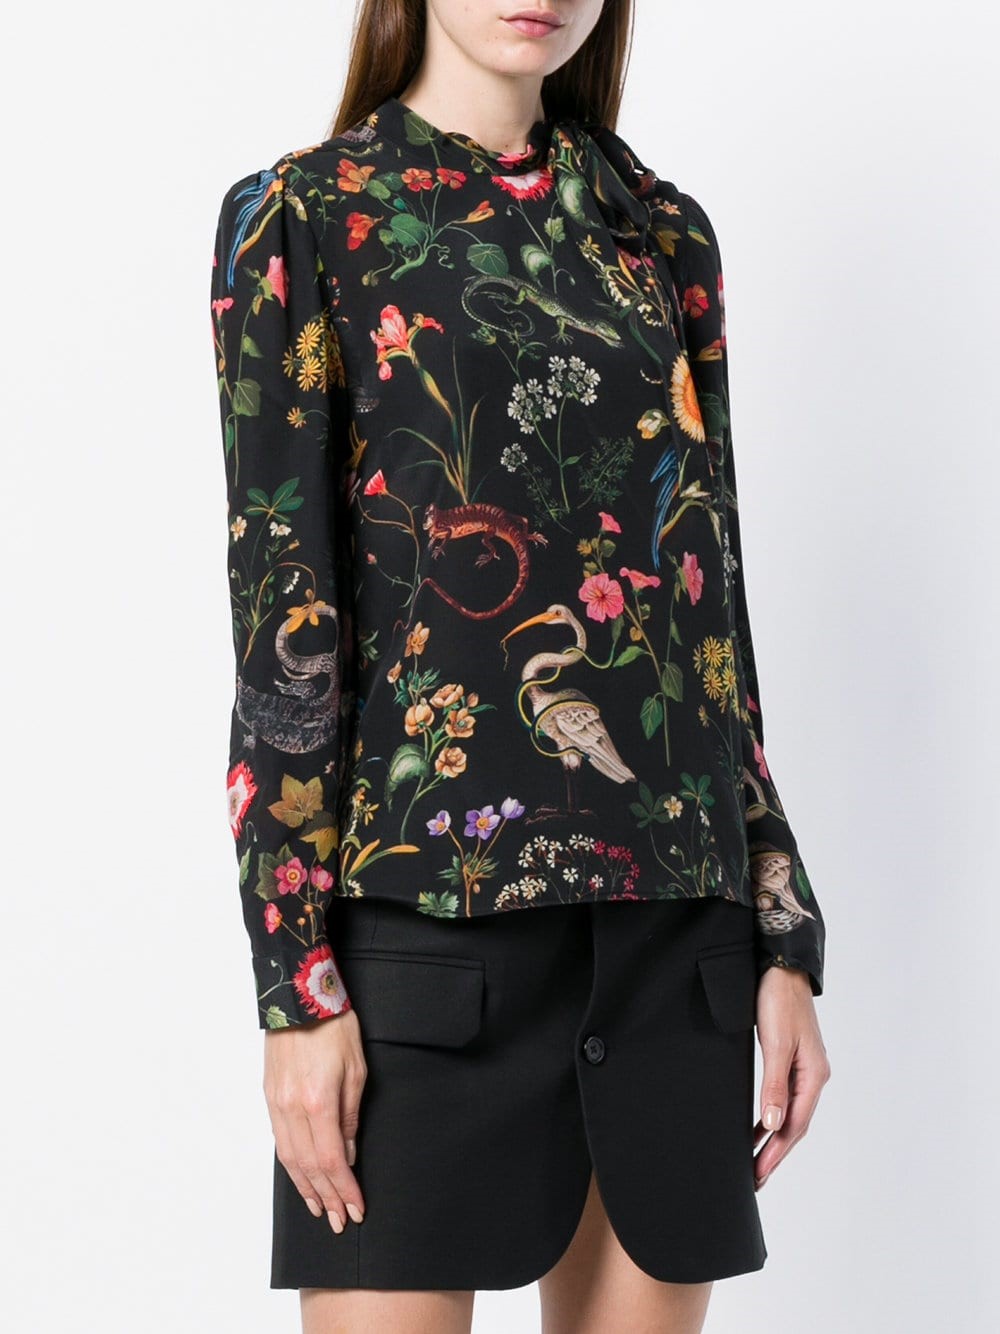 red valentino FLORAL PRINT SHIRT available on montiboutique.com 